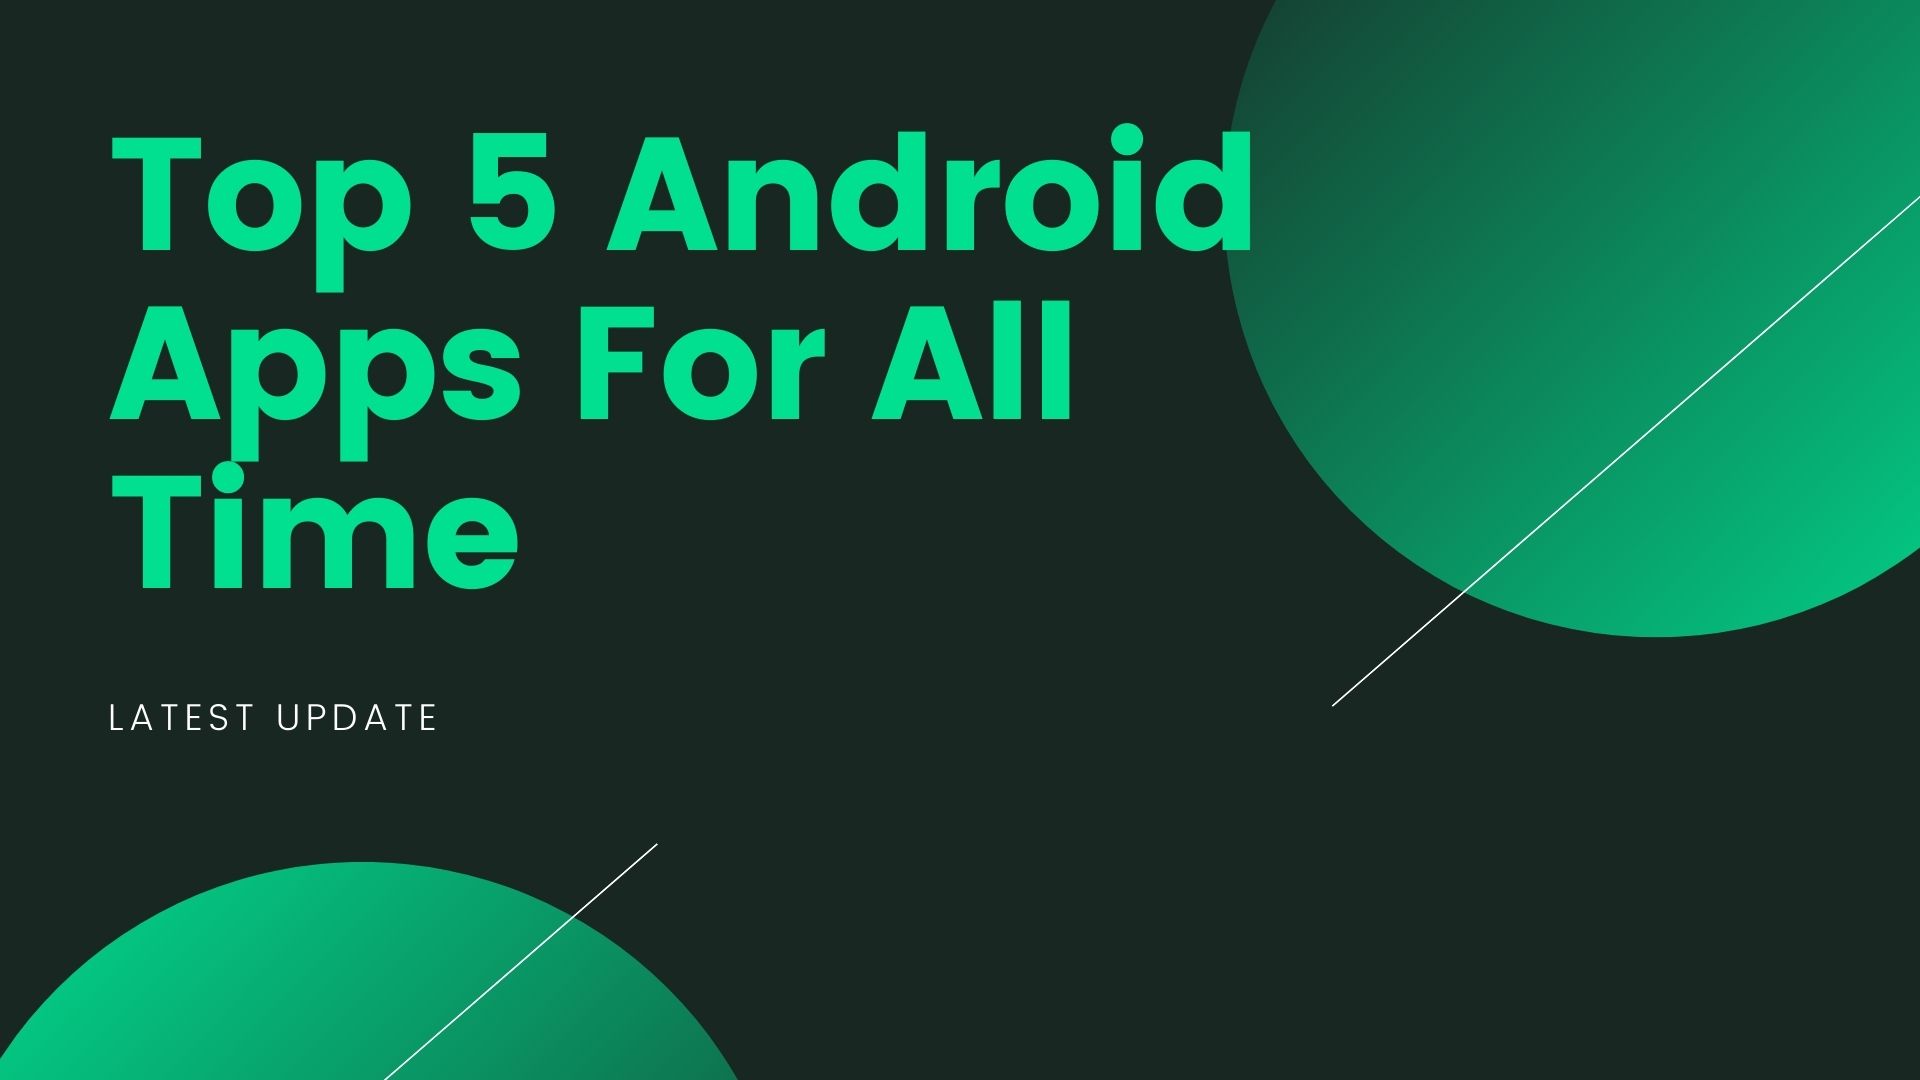 Top 5 Android Apps For All Time